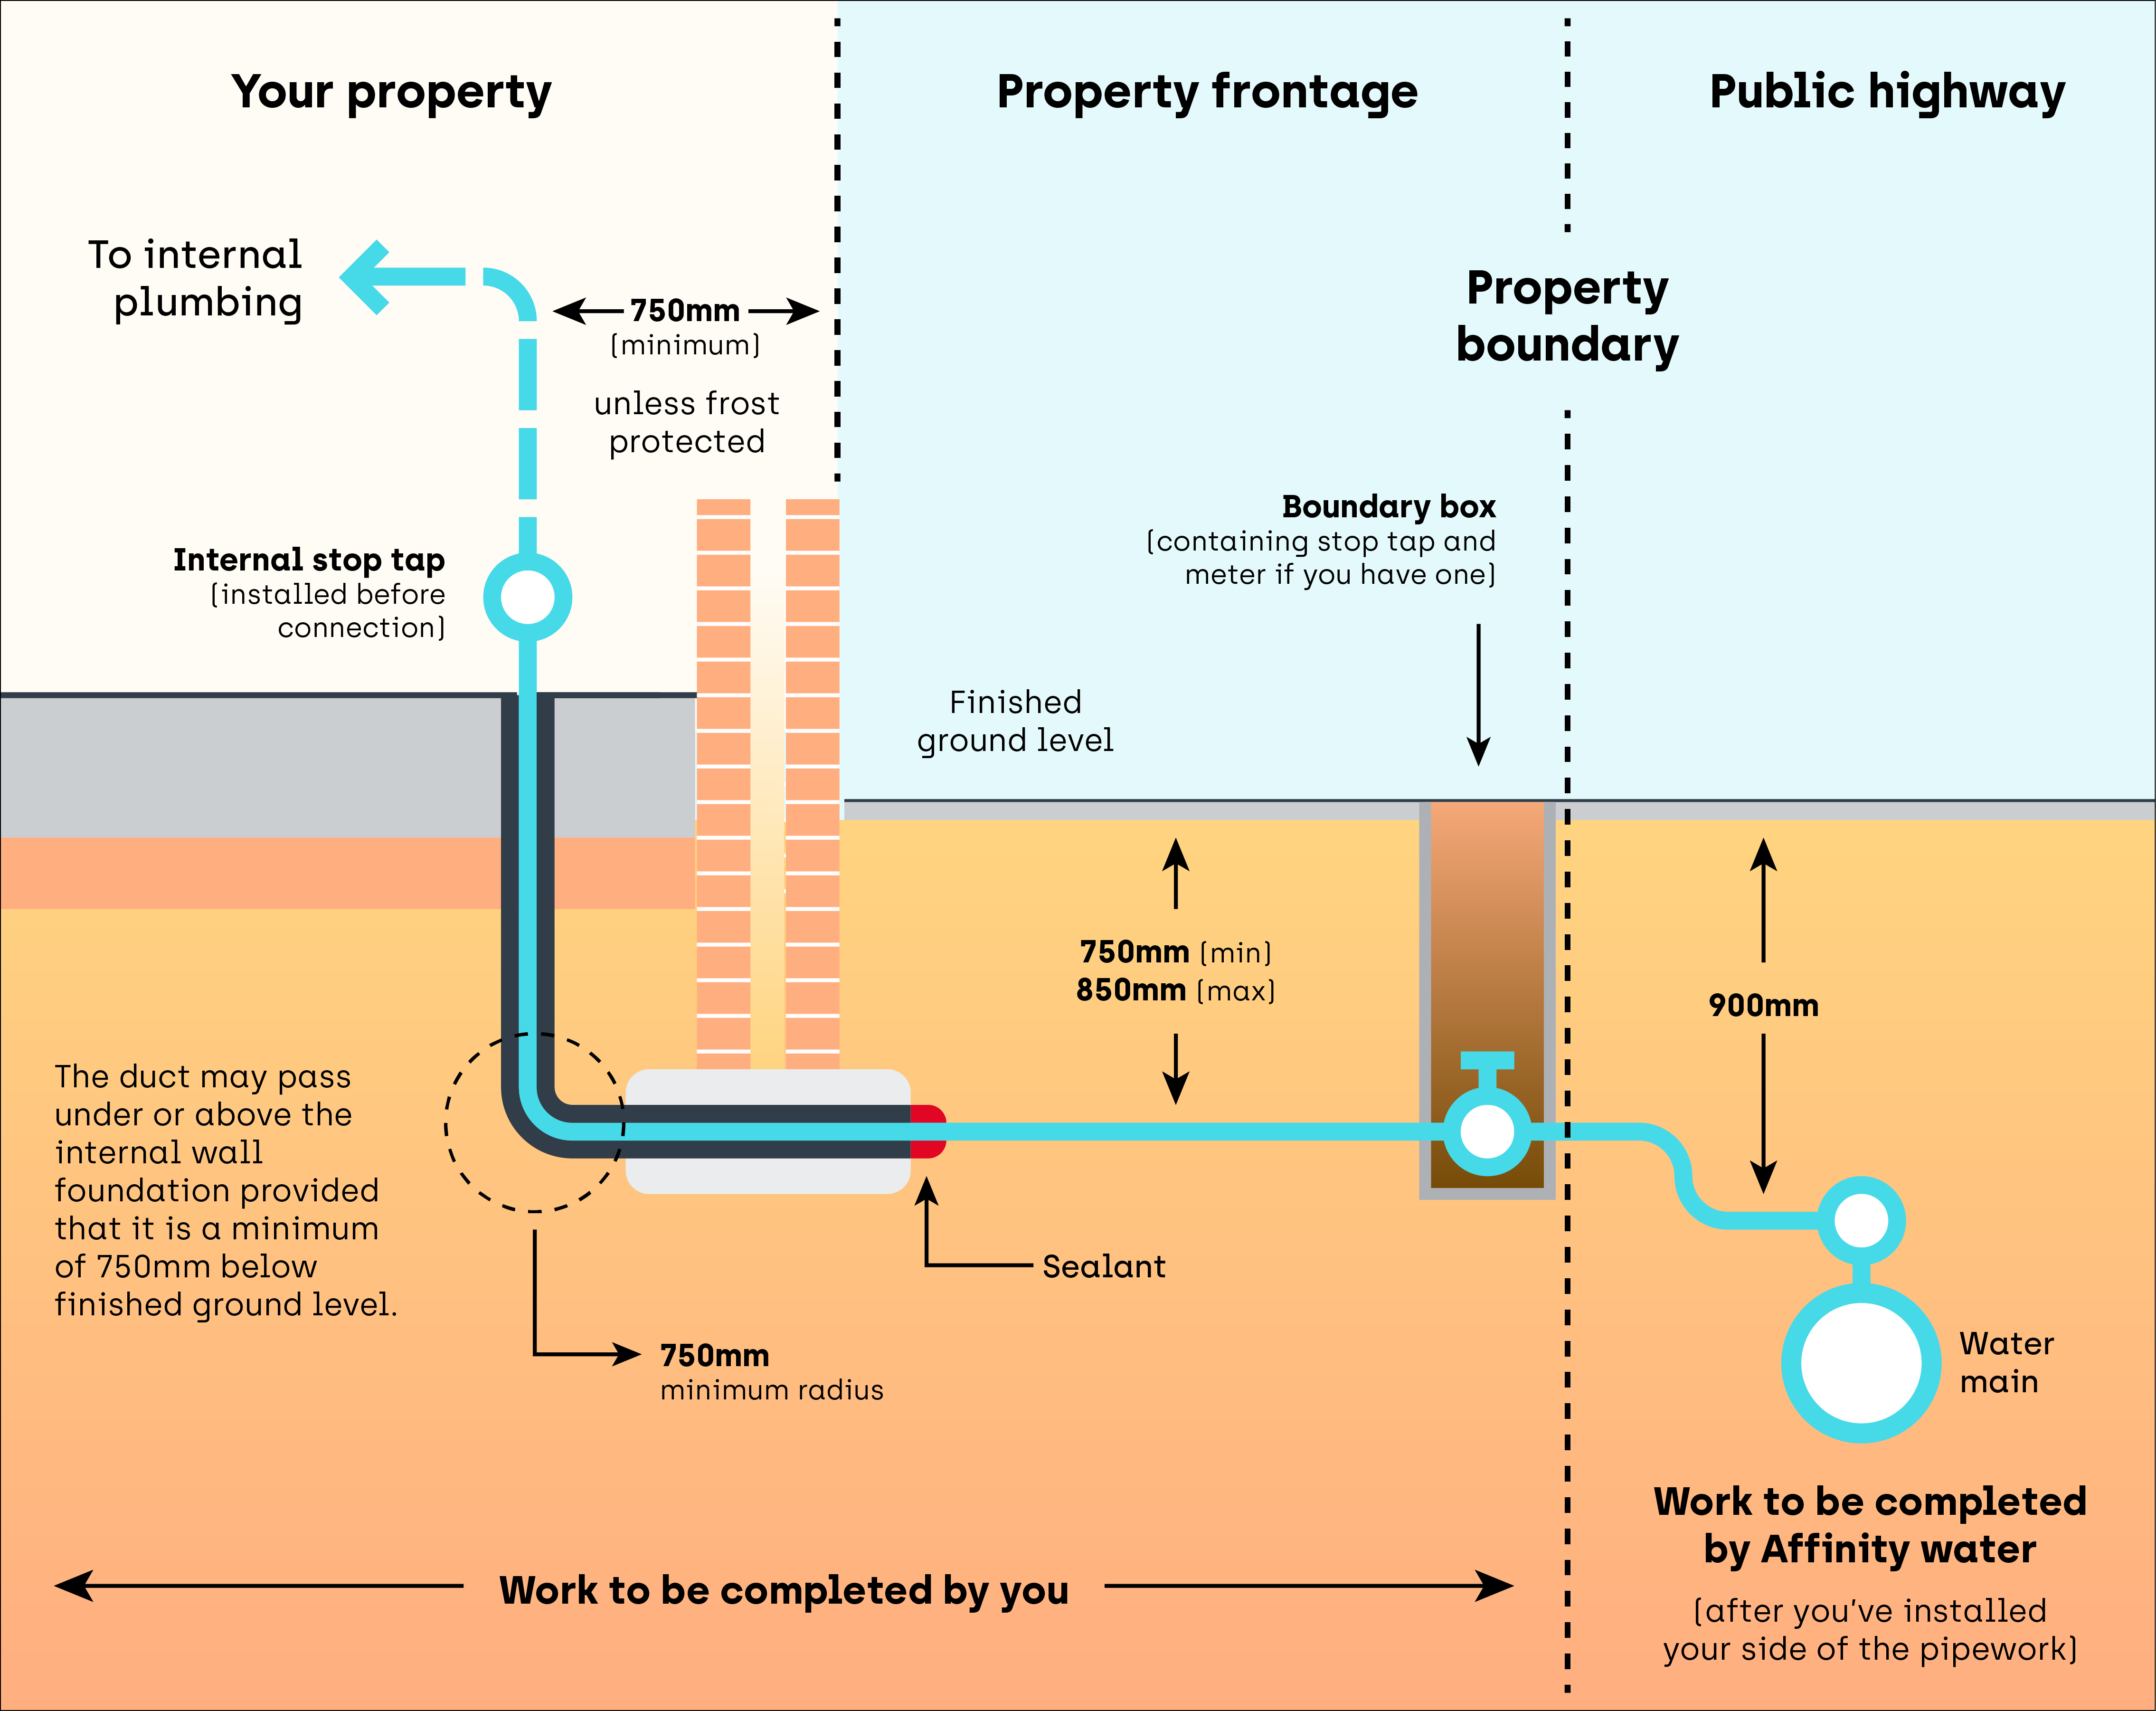 You're responsible for your property and property frontage, Affinity Water are responsible for the public highway